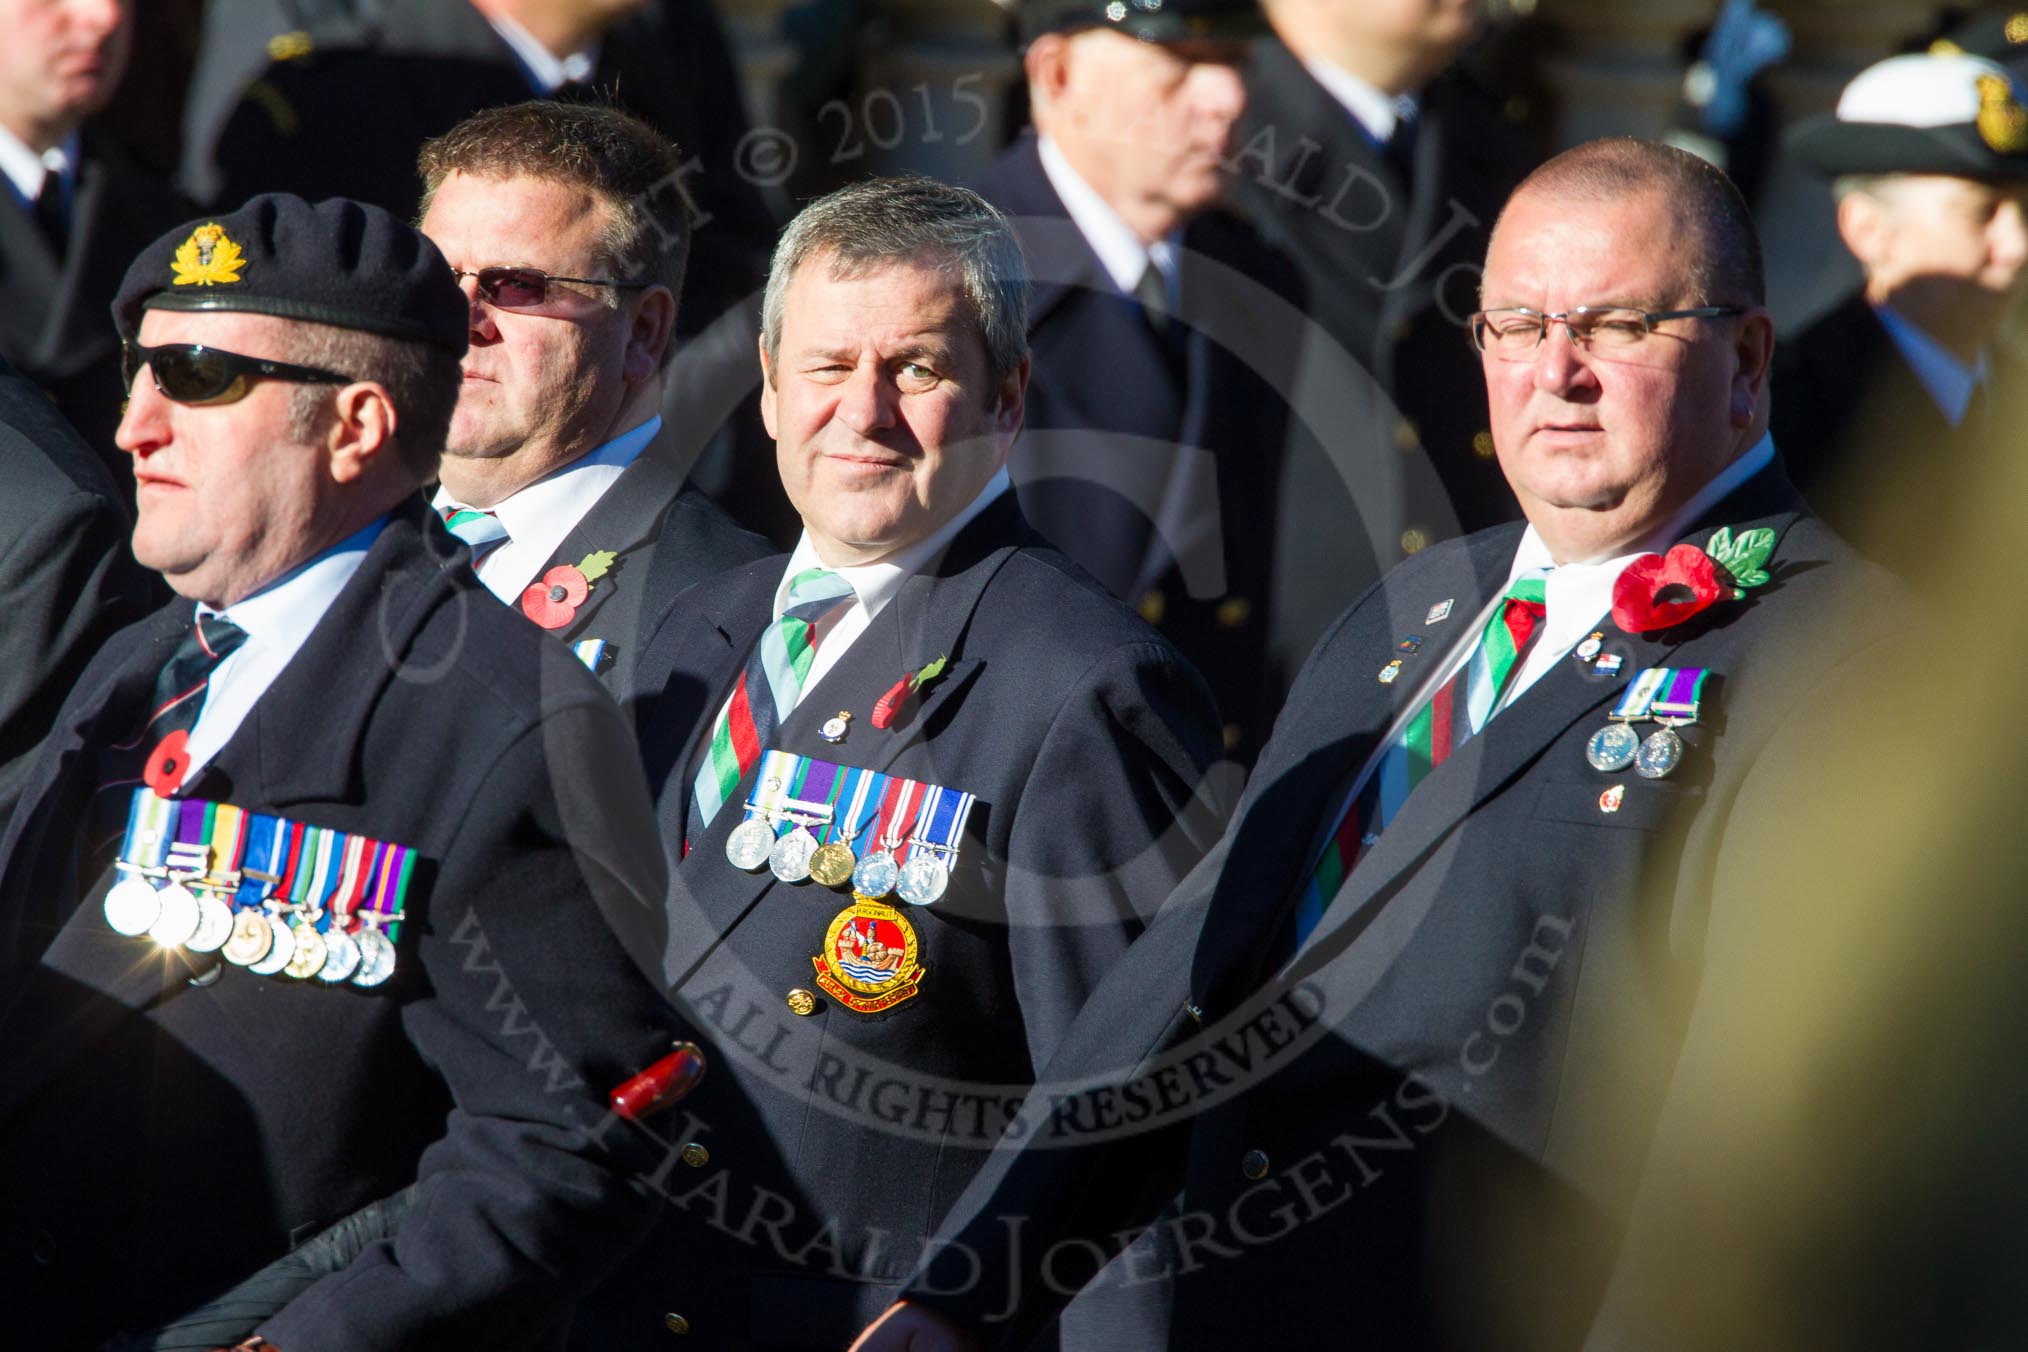 Remembrance Sunday Cenotaph March Past 2013: D23 - South Atlantic Medal Association (SAMA 82): The South Atlantic Medal (1982) is the official name of the medal awarded to almost 30,000 service men and women - and civilians - who took part in the campaign to liberate the Falkland Islands in 1982. The South Atlantic Medal Association is their Association..
Press stand opposite the Foreign Office building, Whitehall, London SW1,
London,
Greater London,
United Kingdom,
on 10 November 2013 at 11:41, image #189